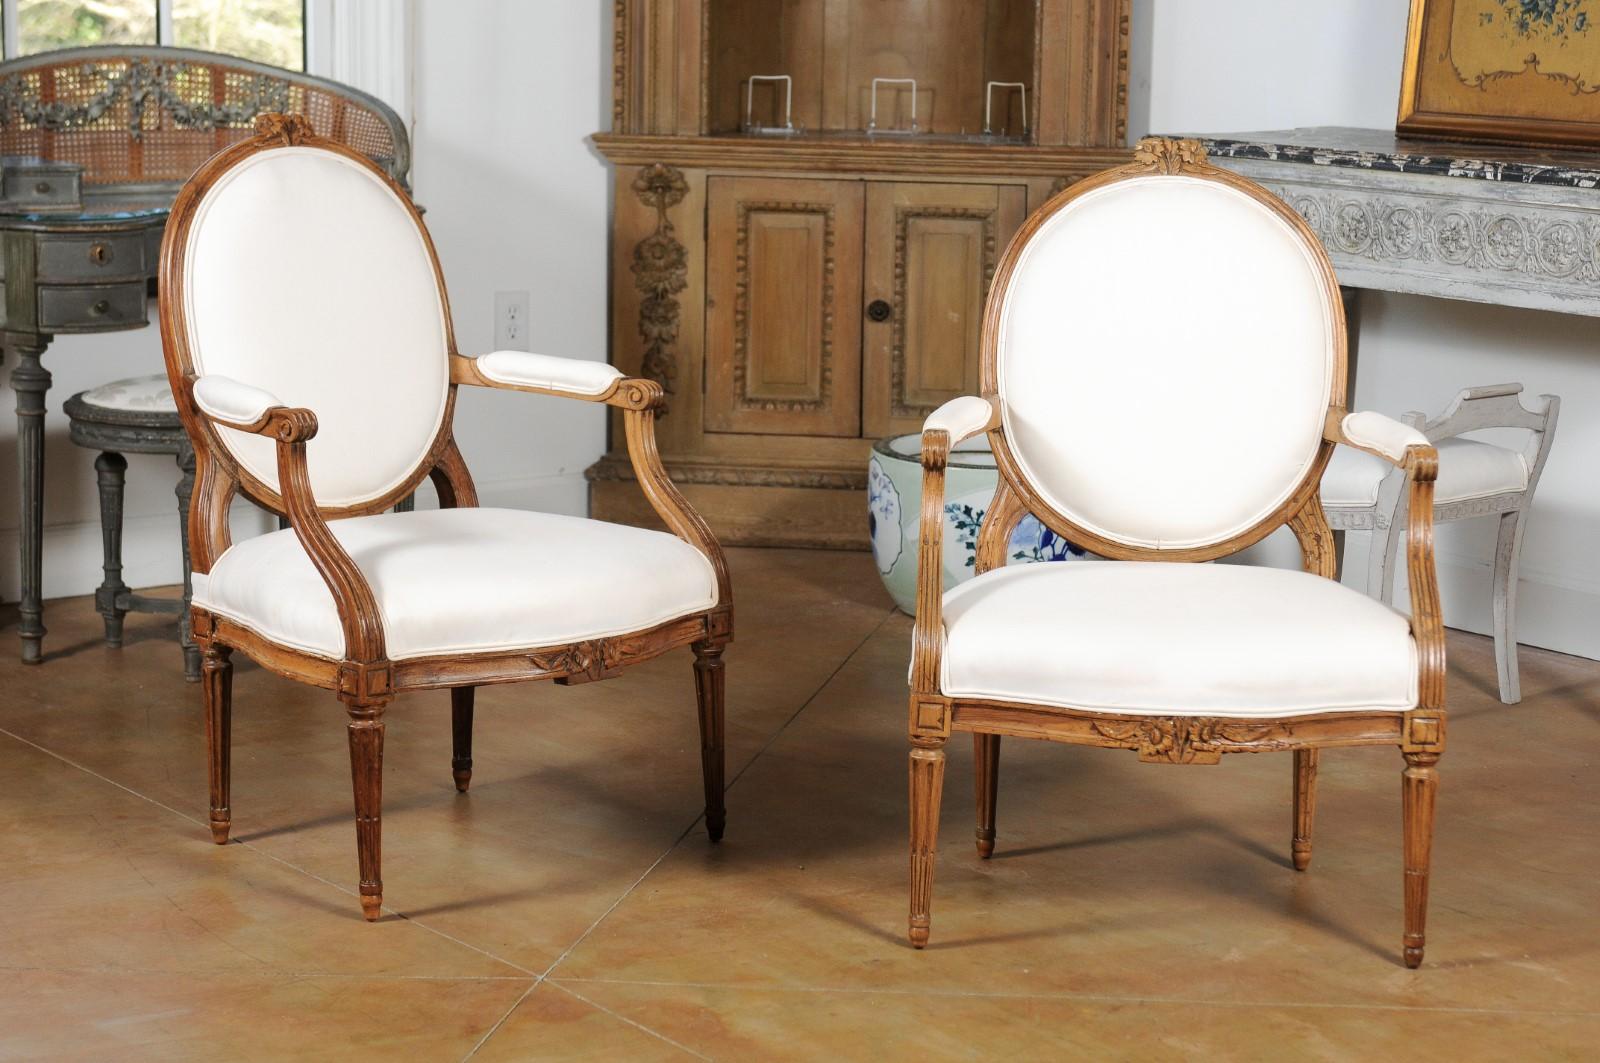 A pair of French Louis XVI style oval back fauteuils from the 19th century, with carved crest, scrolling arms and upholstery. Born in France during the 19th century, each of this pair of armchairs features an oval back topped with a floral carved